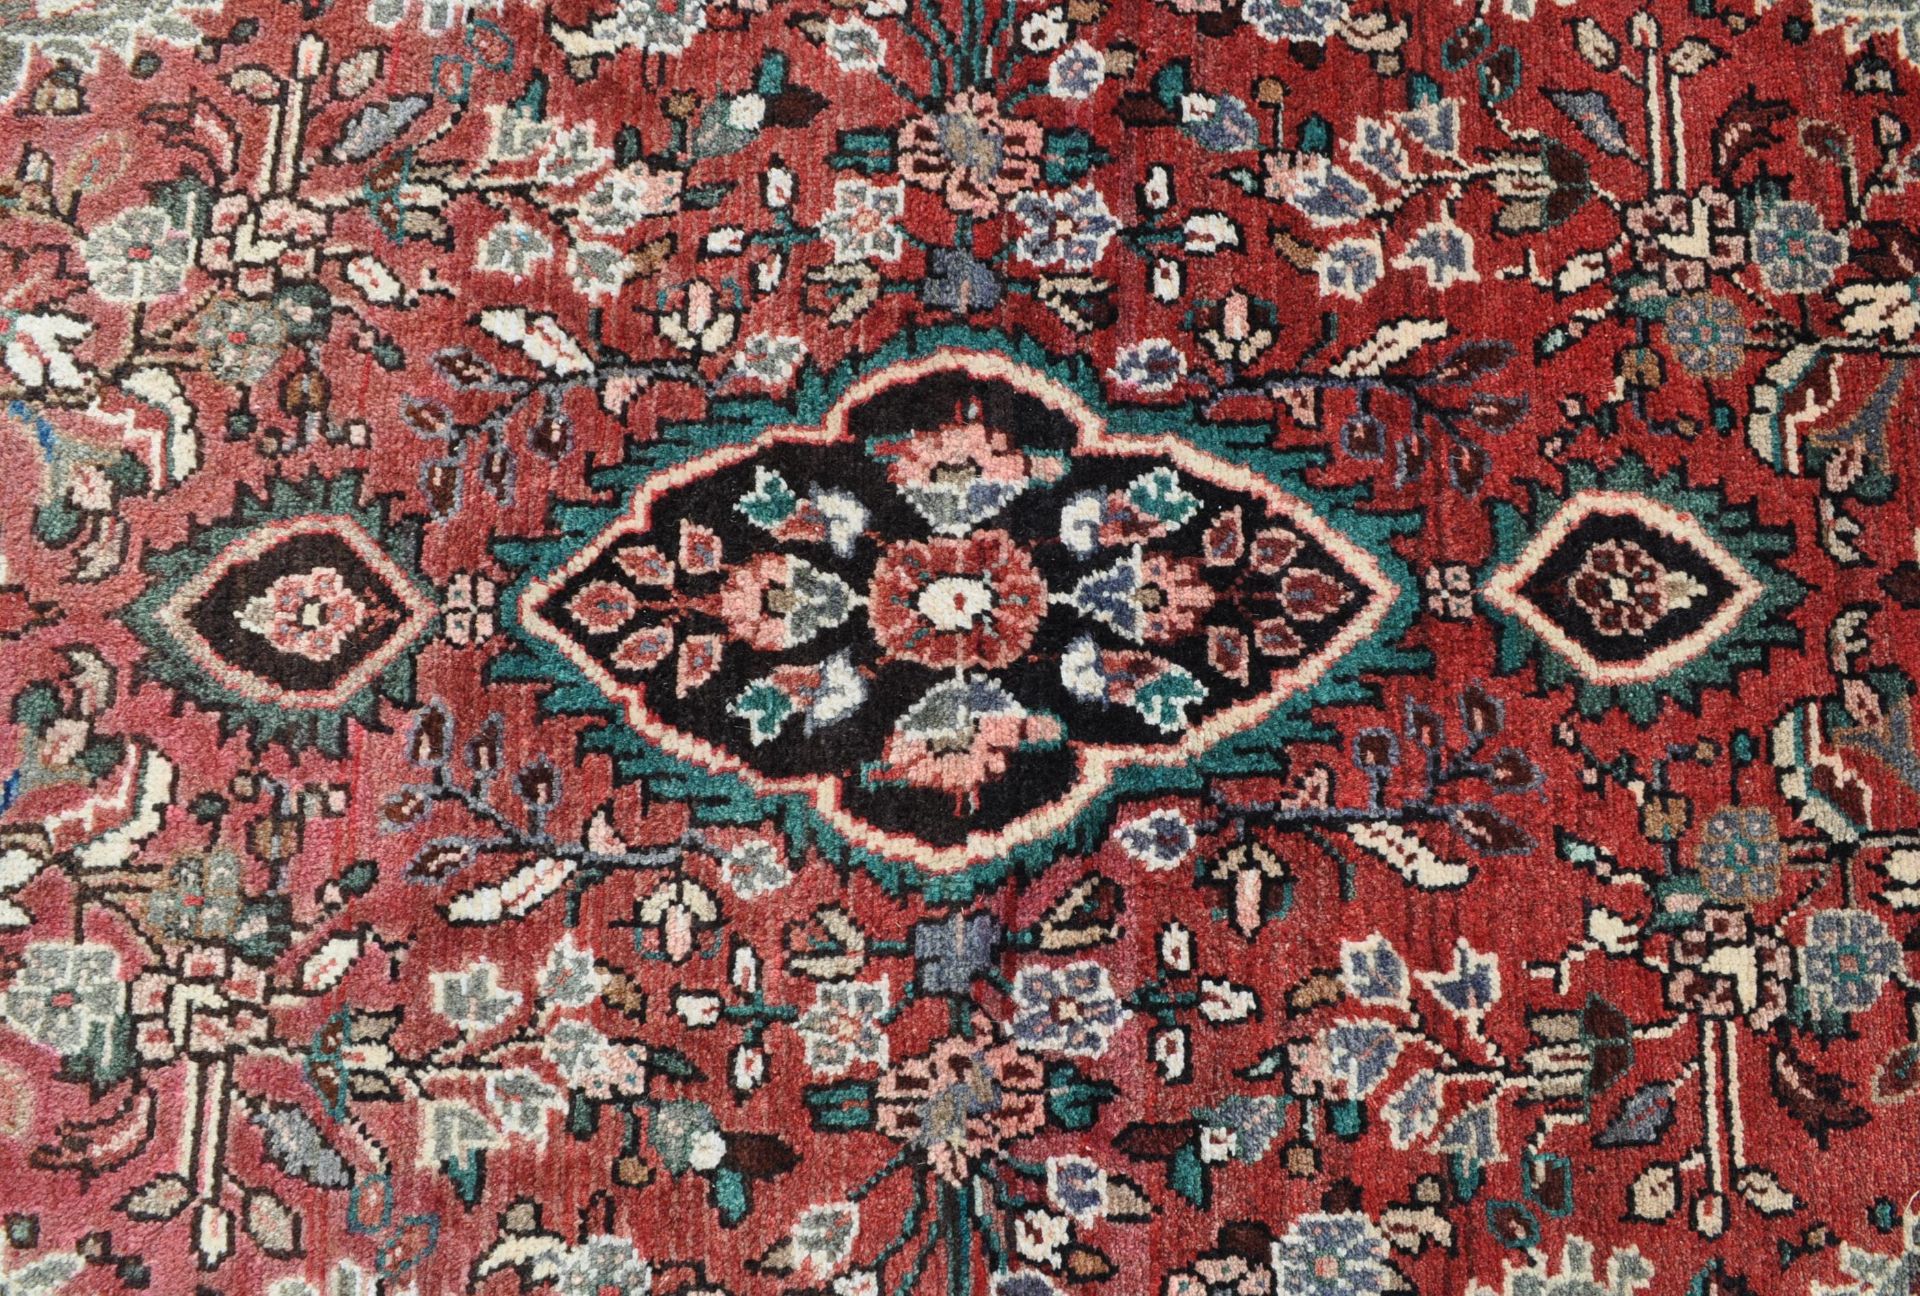 20TH CENTURY NORTH WEST PERSIAN BORCHALUE RUG - Image 2 of 3